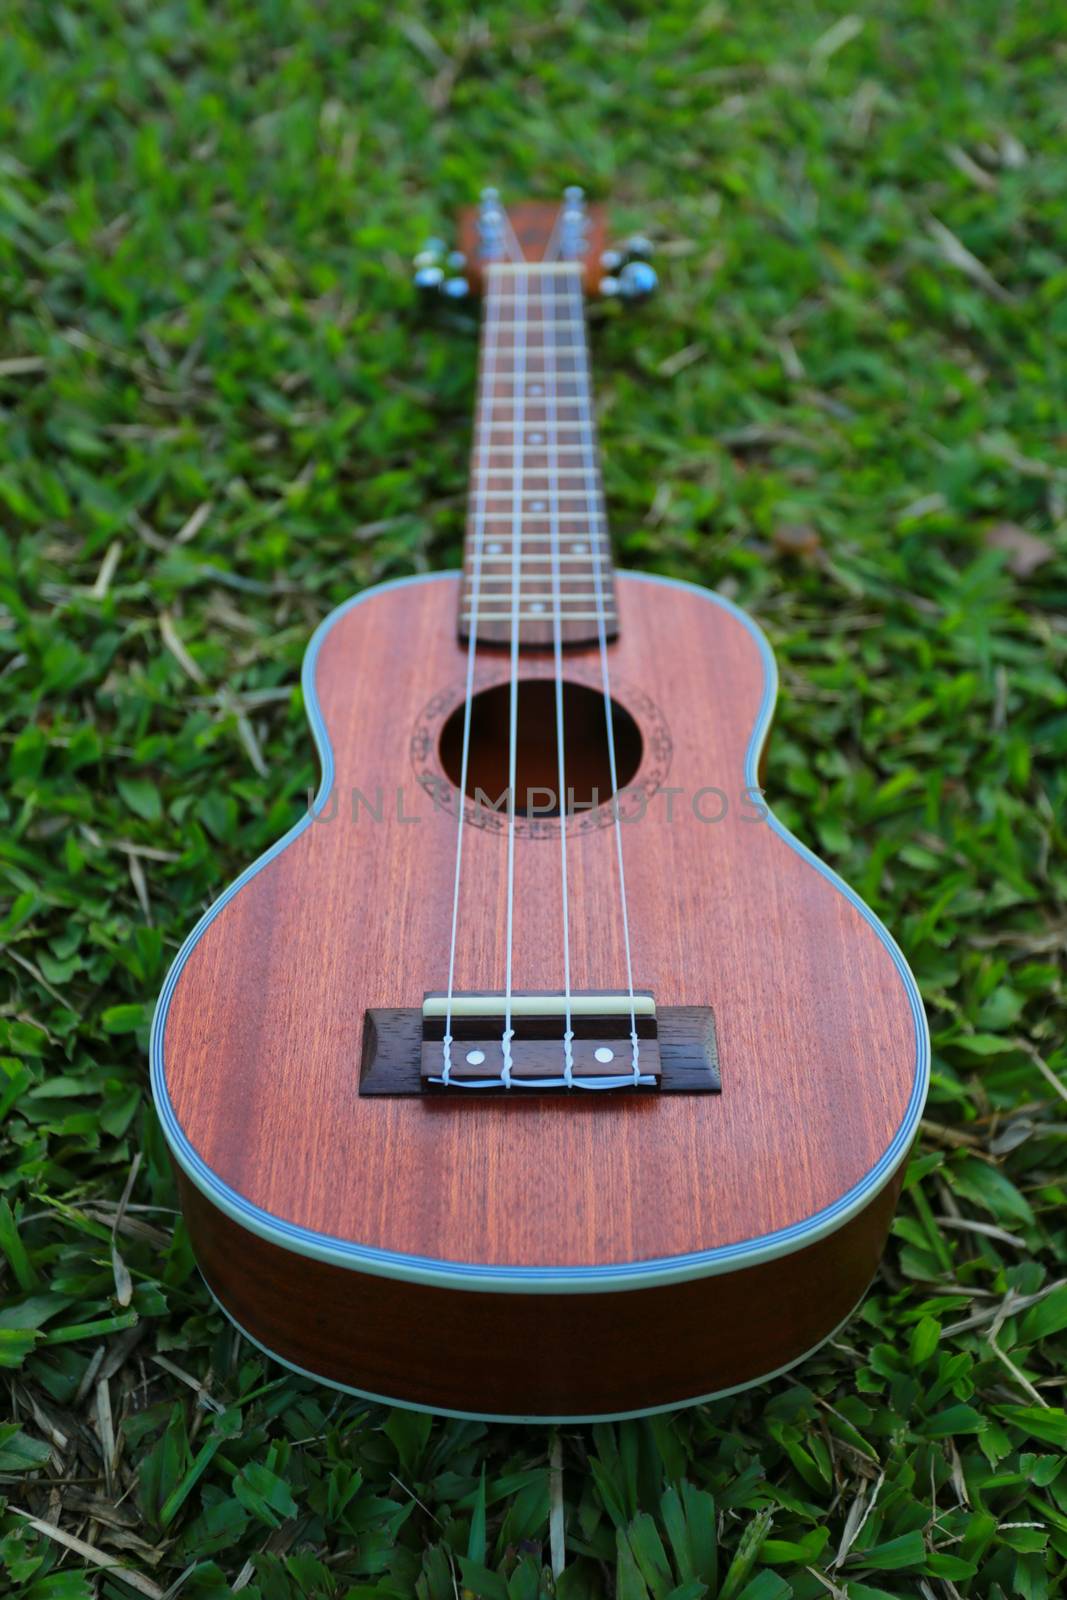 The ukulele is lay down on the green grassland.